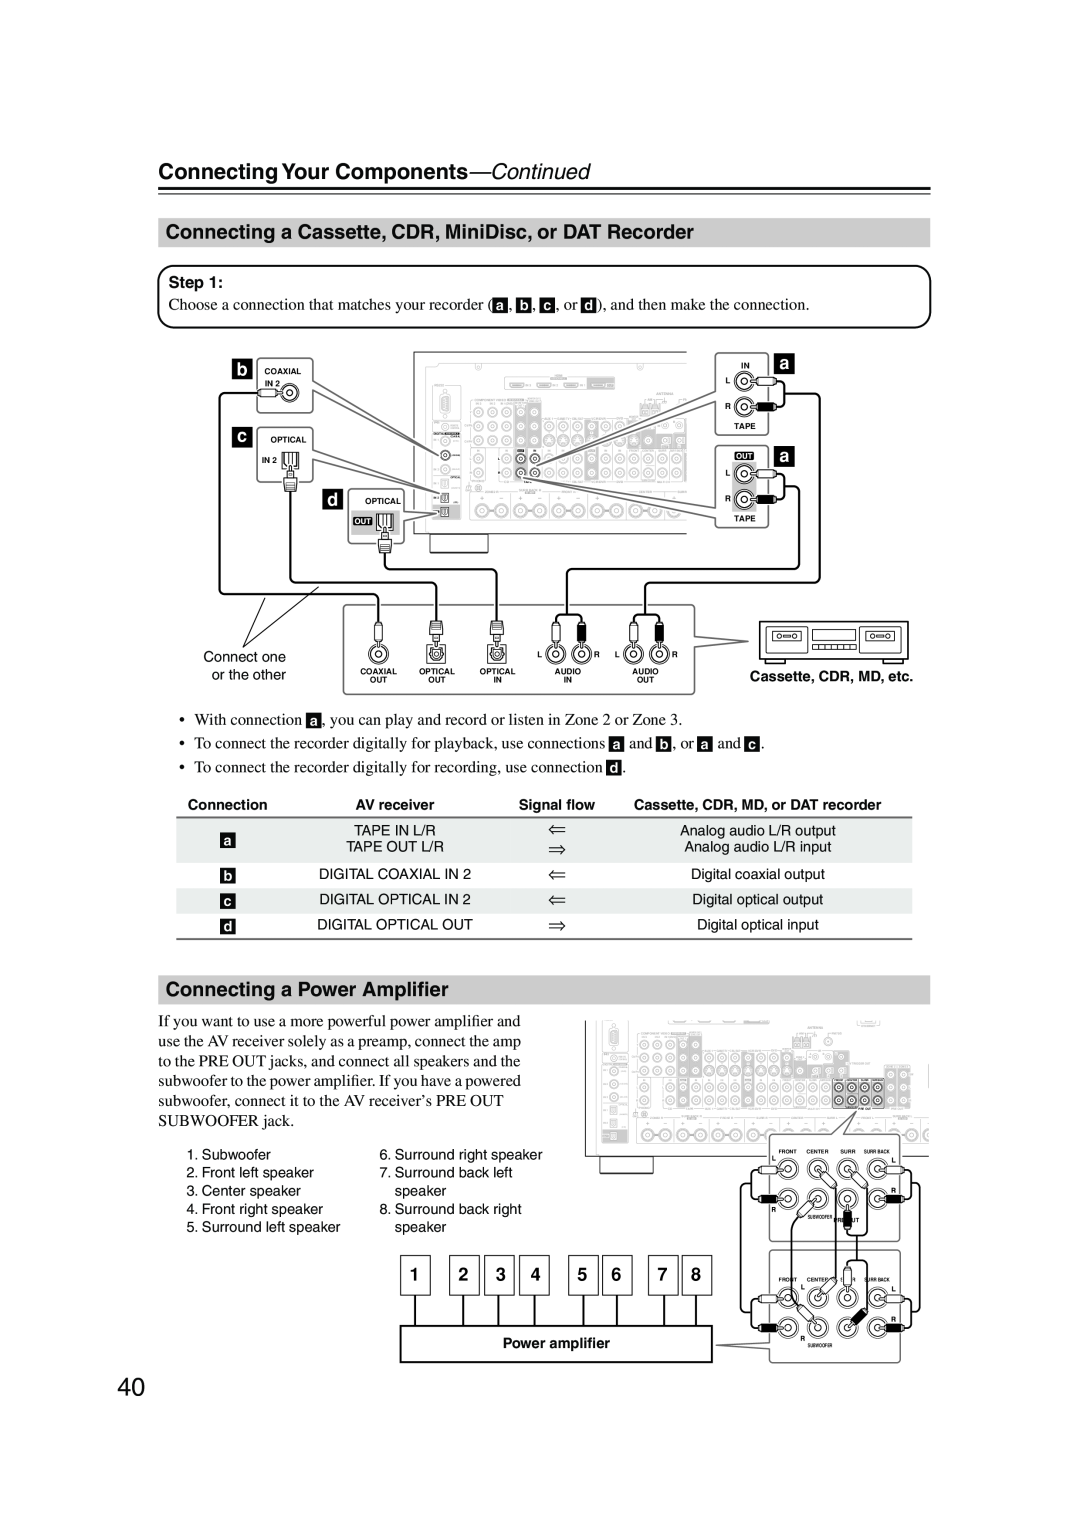 Integra DTR-7.8 instruction manual Connecting a Power Ampliﬁer, Connecting Your Components—Continued, Power ampliﬁer 